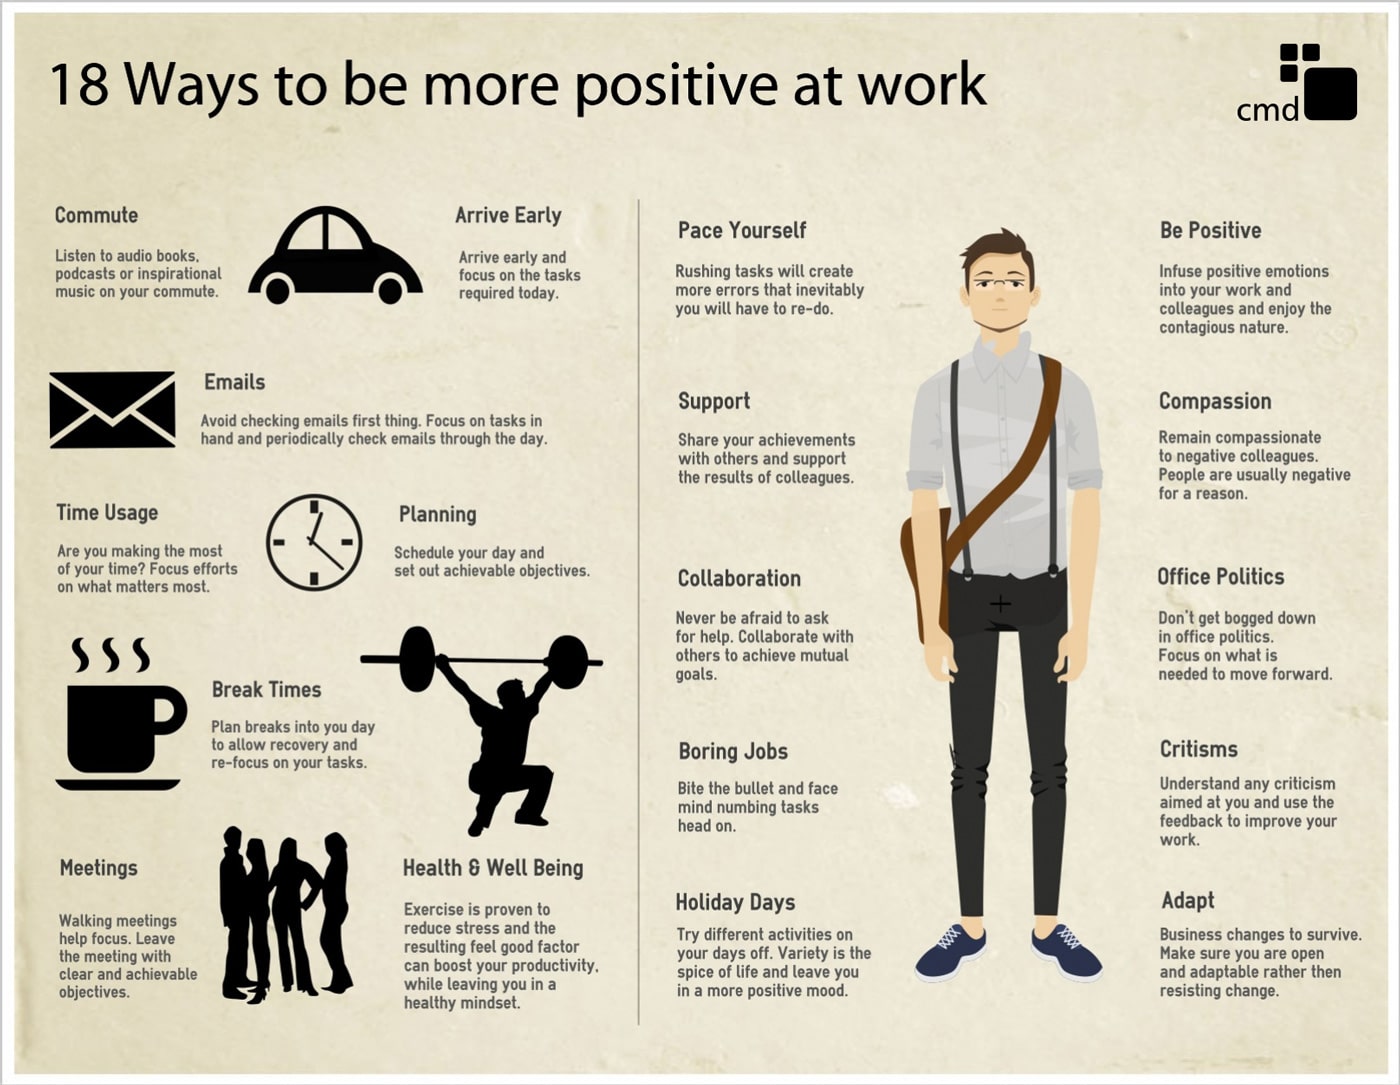 18 More Positive Ways Infographic